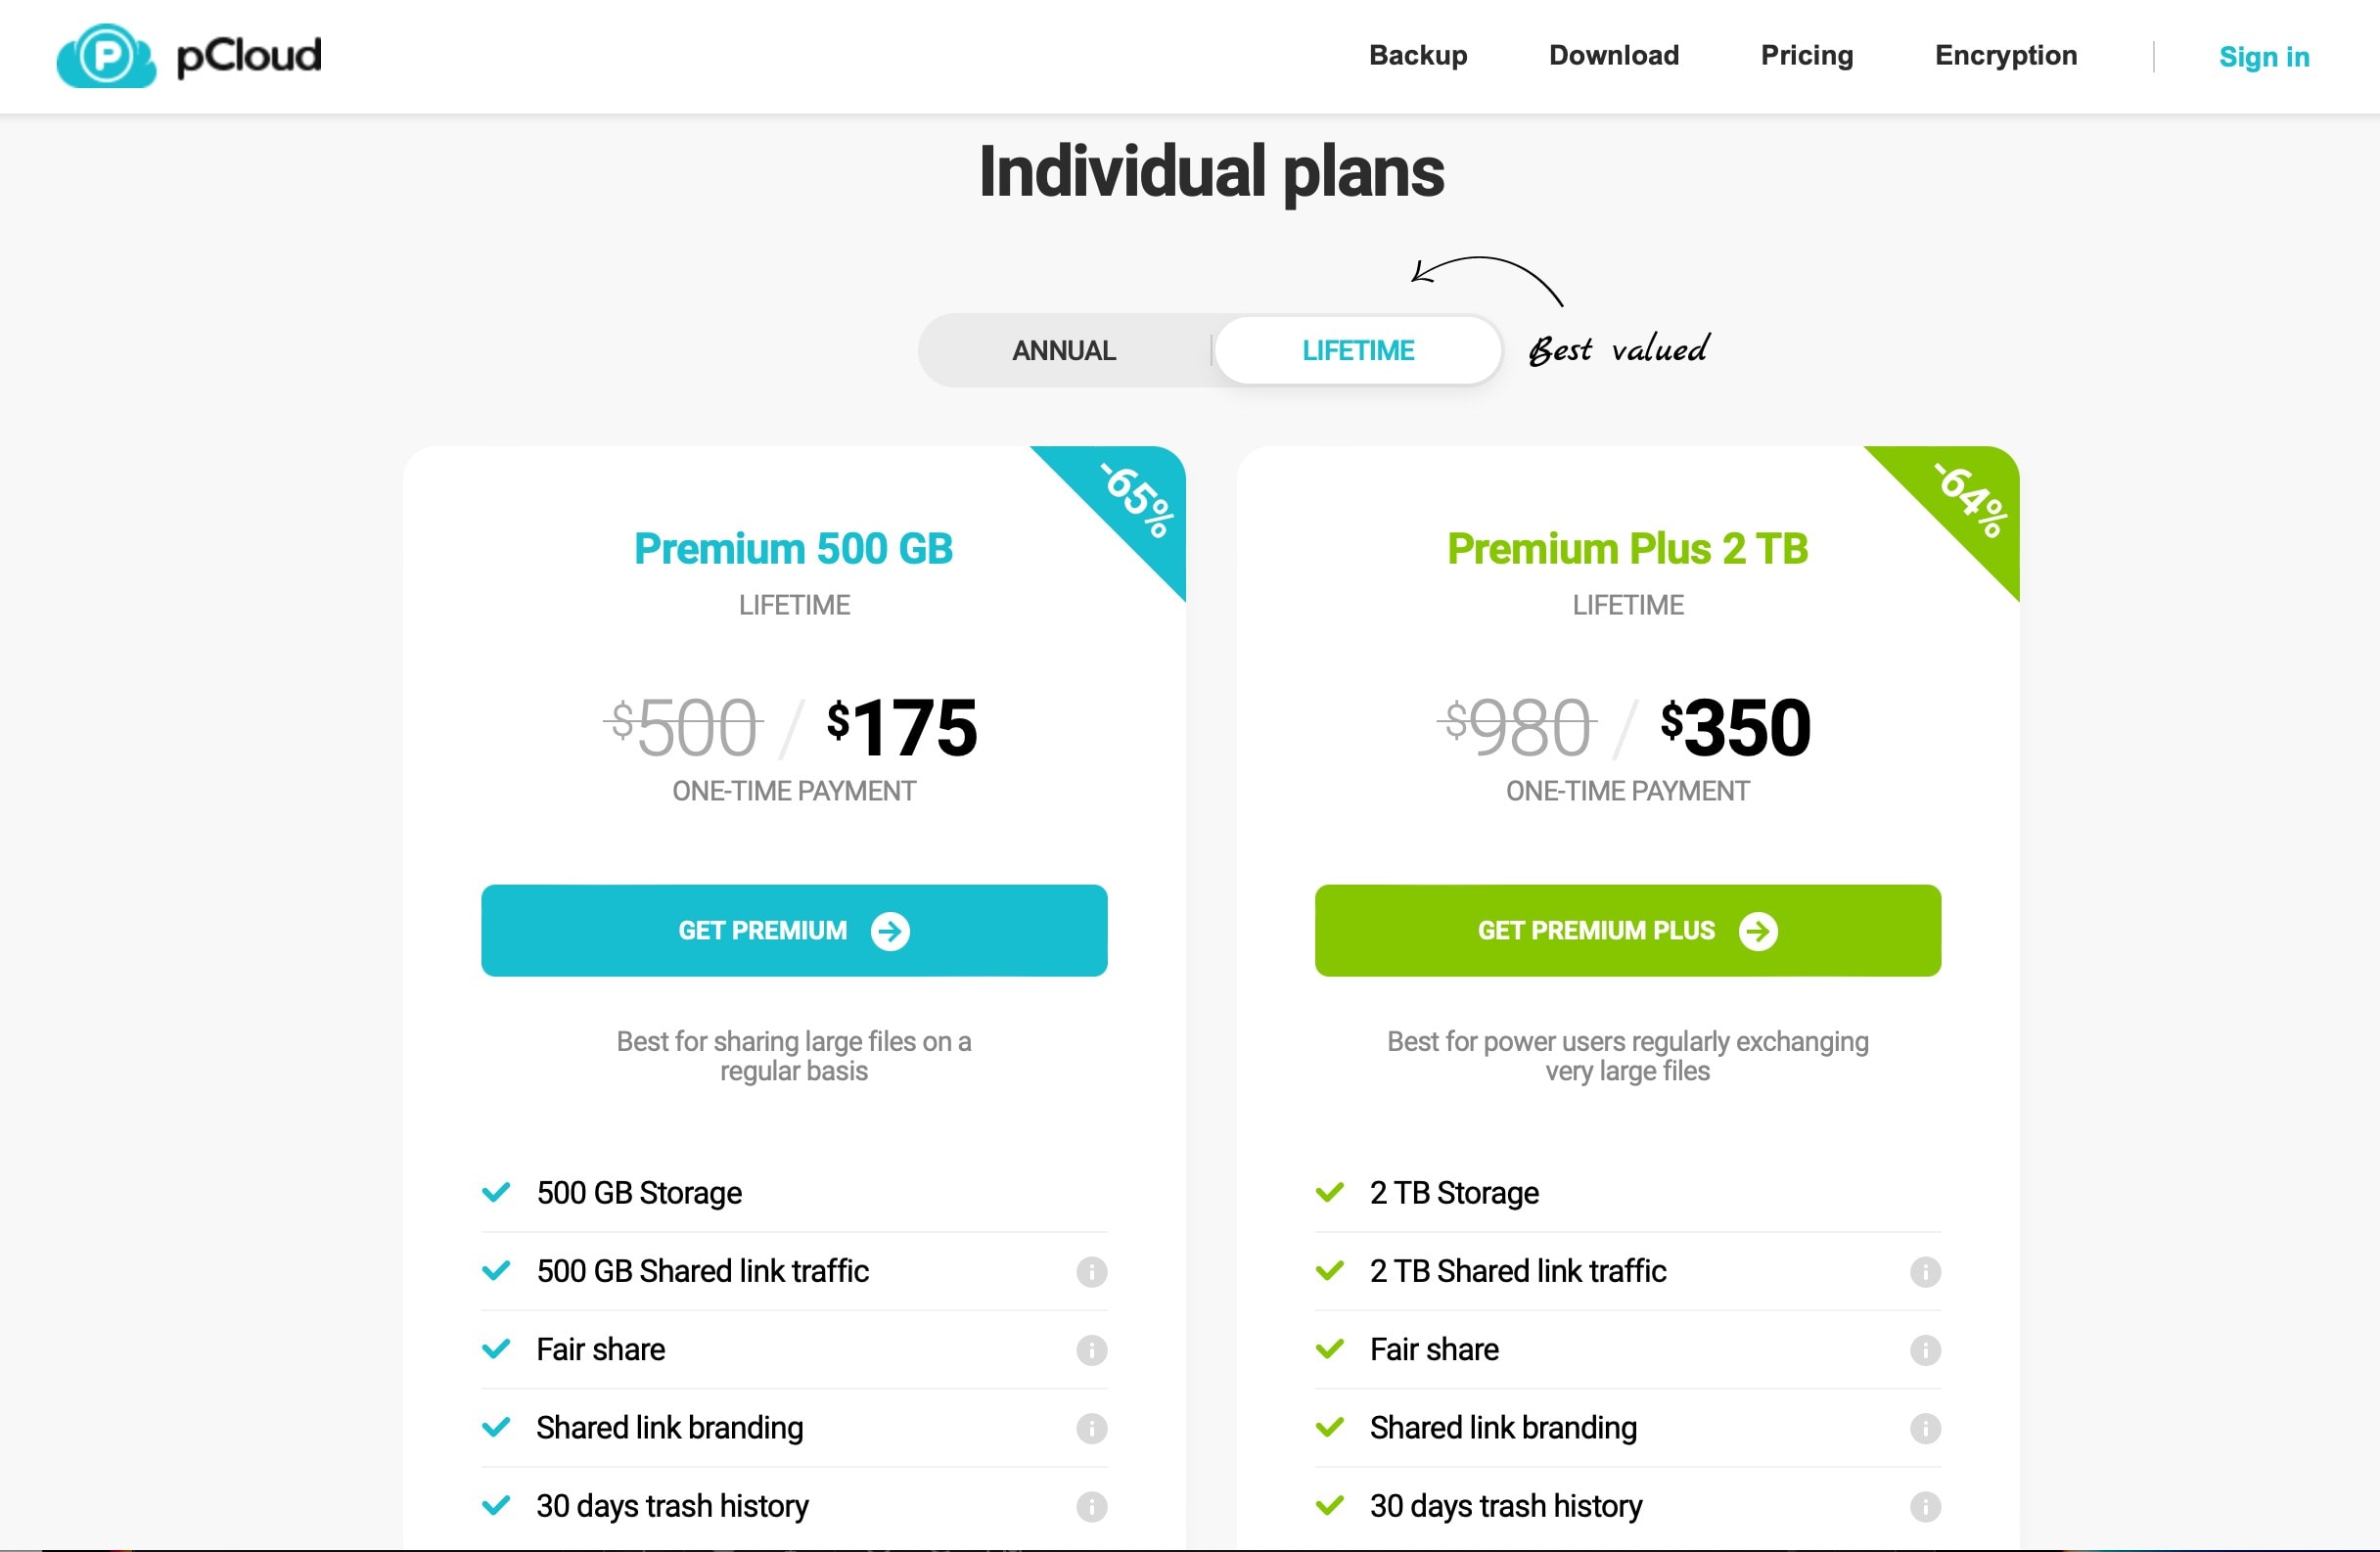 pCloud offers affordable lifetime plans and other options. 